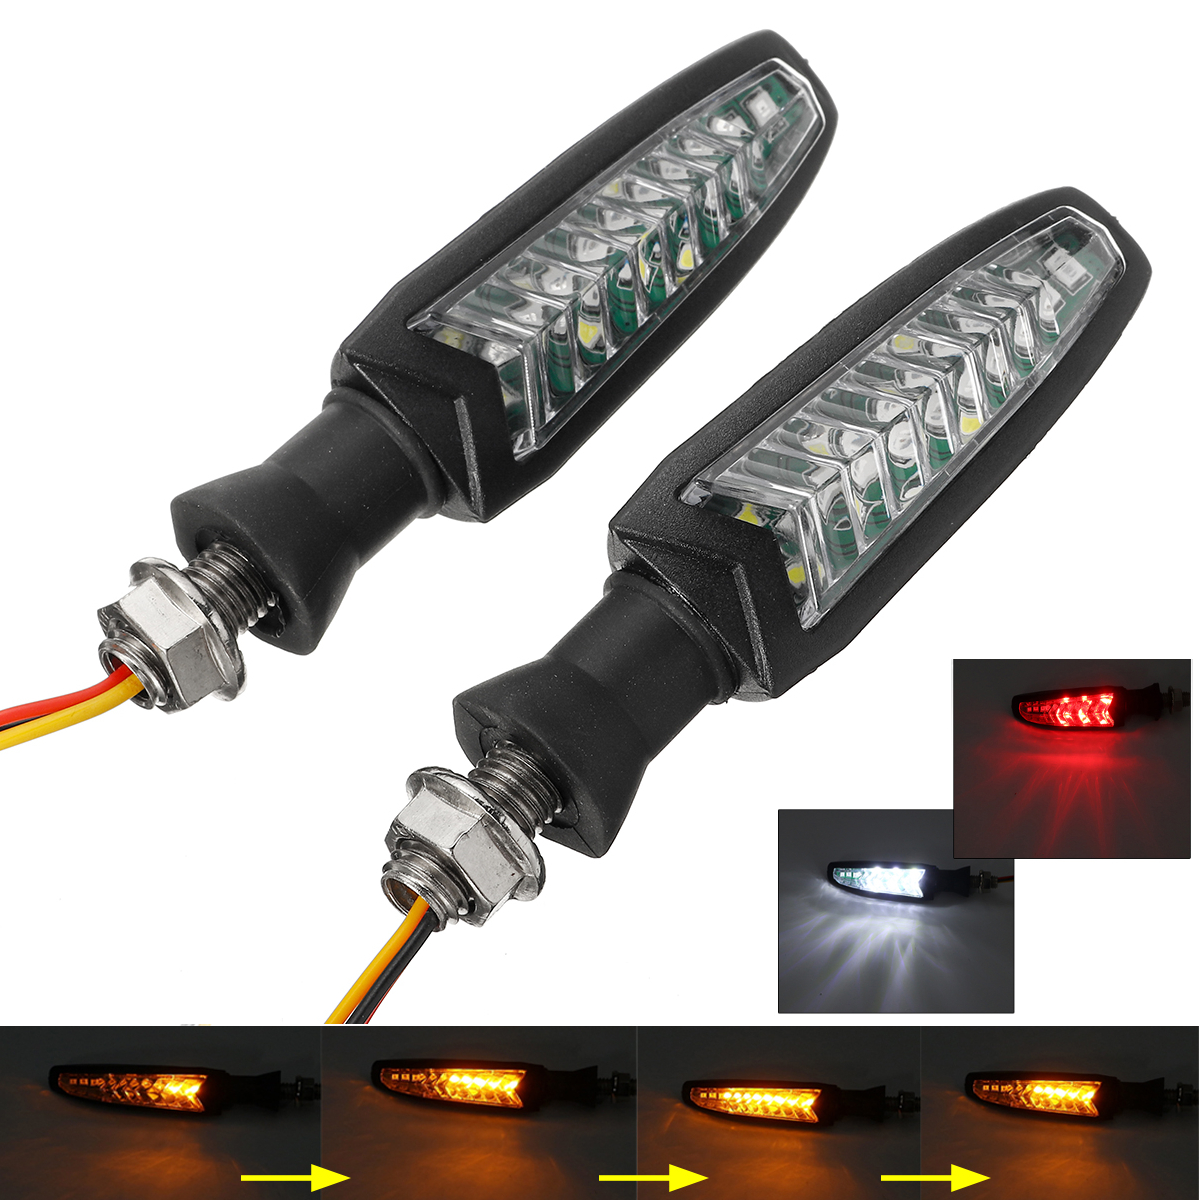 

12V Motorcycle Sequential Flowing 18 LED Turn Signal Indicator DRL Stop Rear Lights